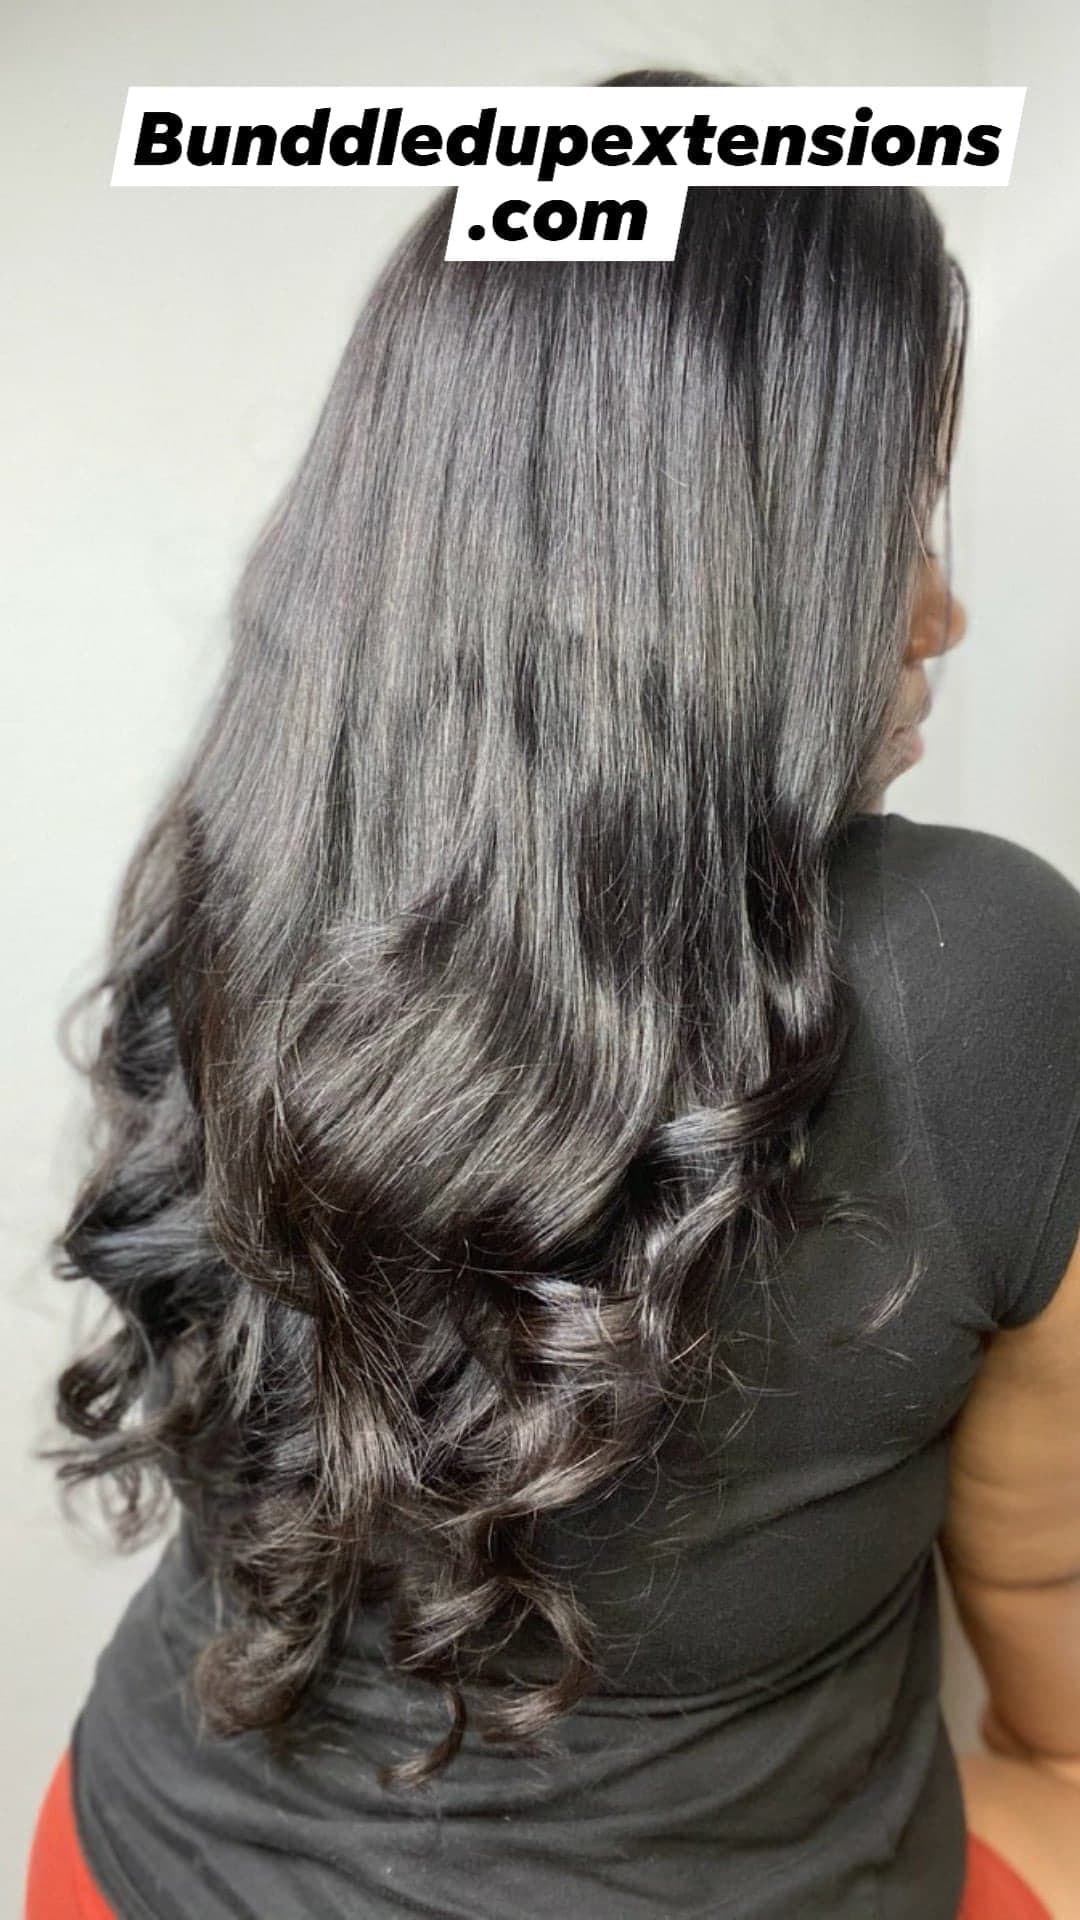 Brazilian Silky Straight - Bunddled Up Extensions